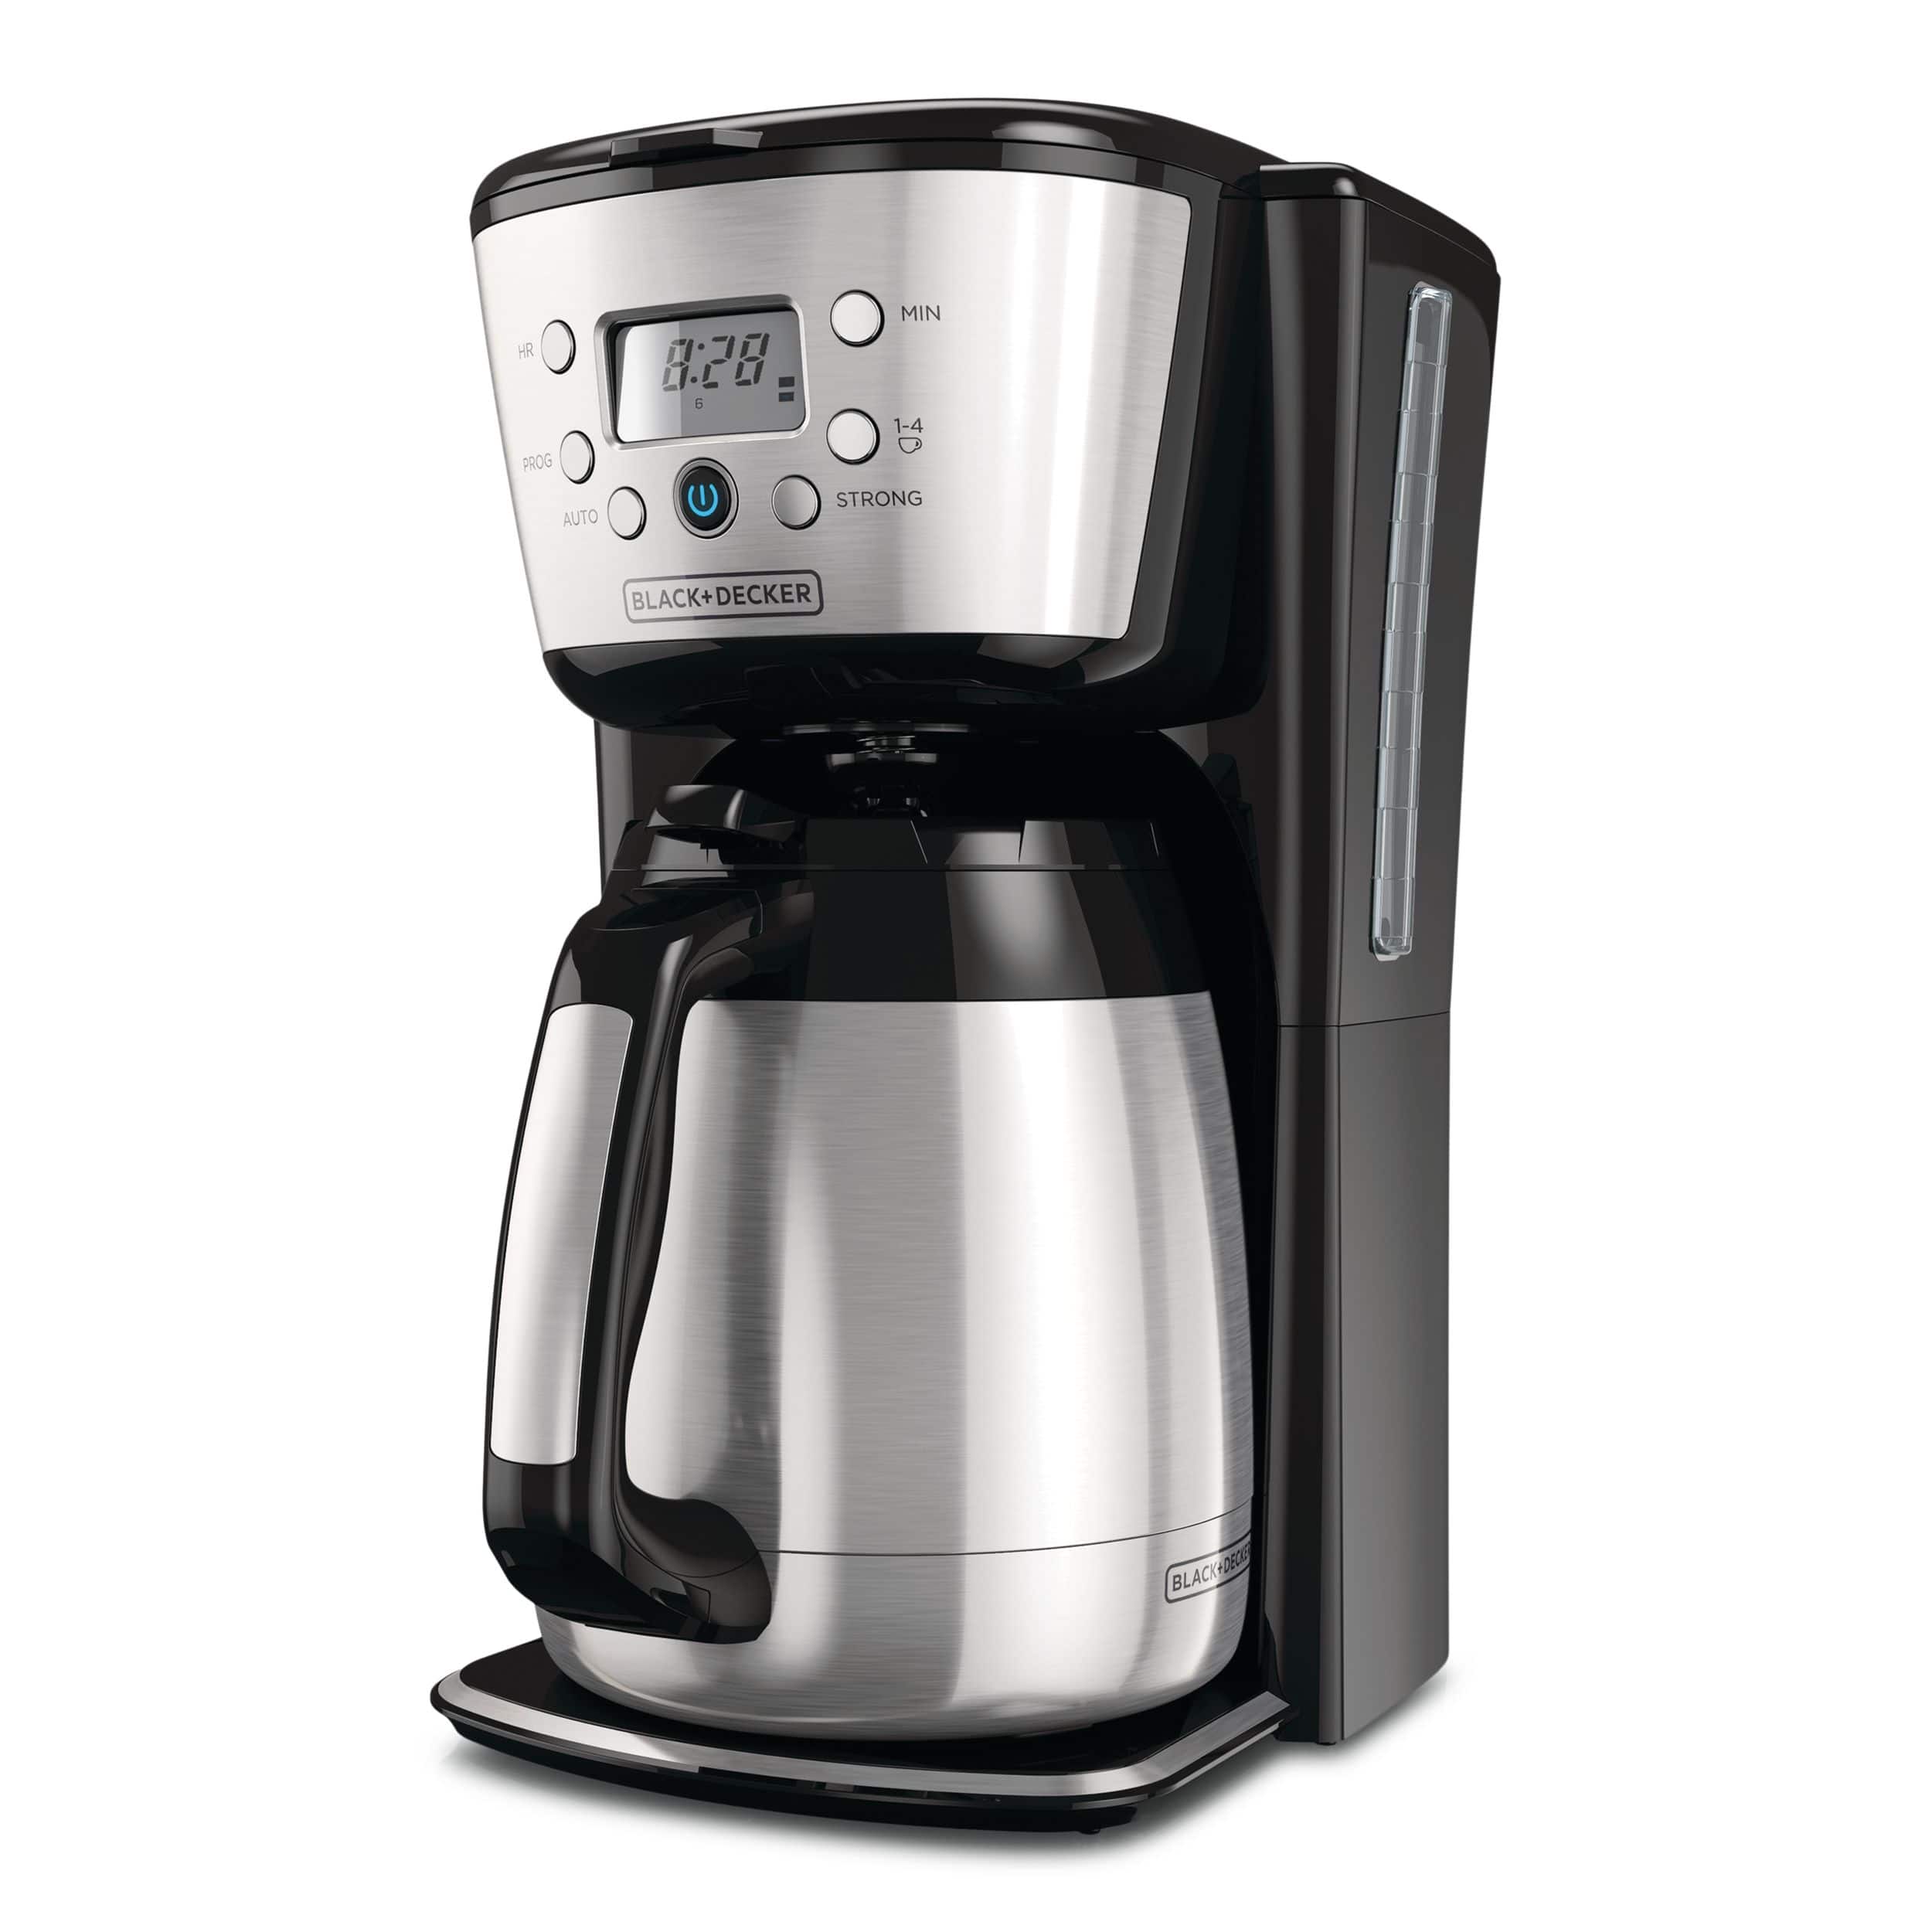 https://media-www.canadiantire.ca/product/living/kitchen/kitchen-appliances/0435286/black-and-decker-12-cup-programmable-thermal-coffeemaker-3a5feed8-60ee-4719-9c81-05ef9b0ff4a3-jpgrendition.jpg